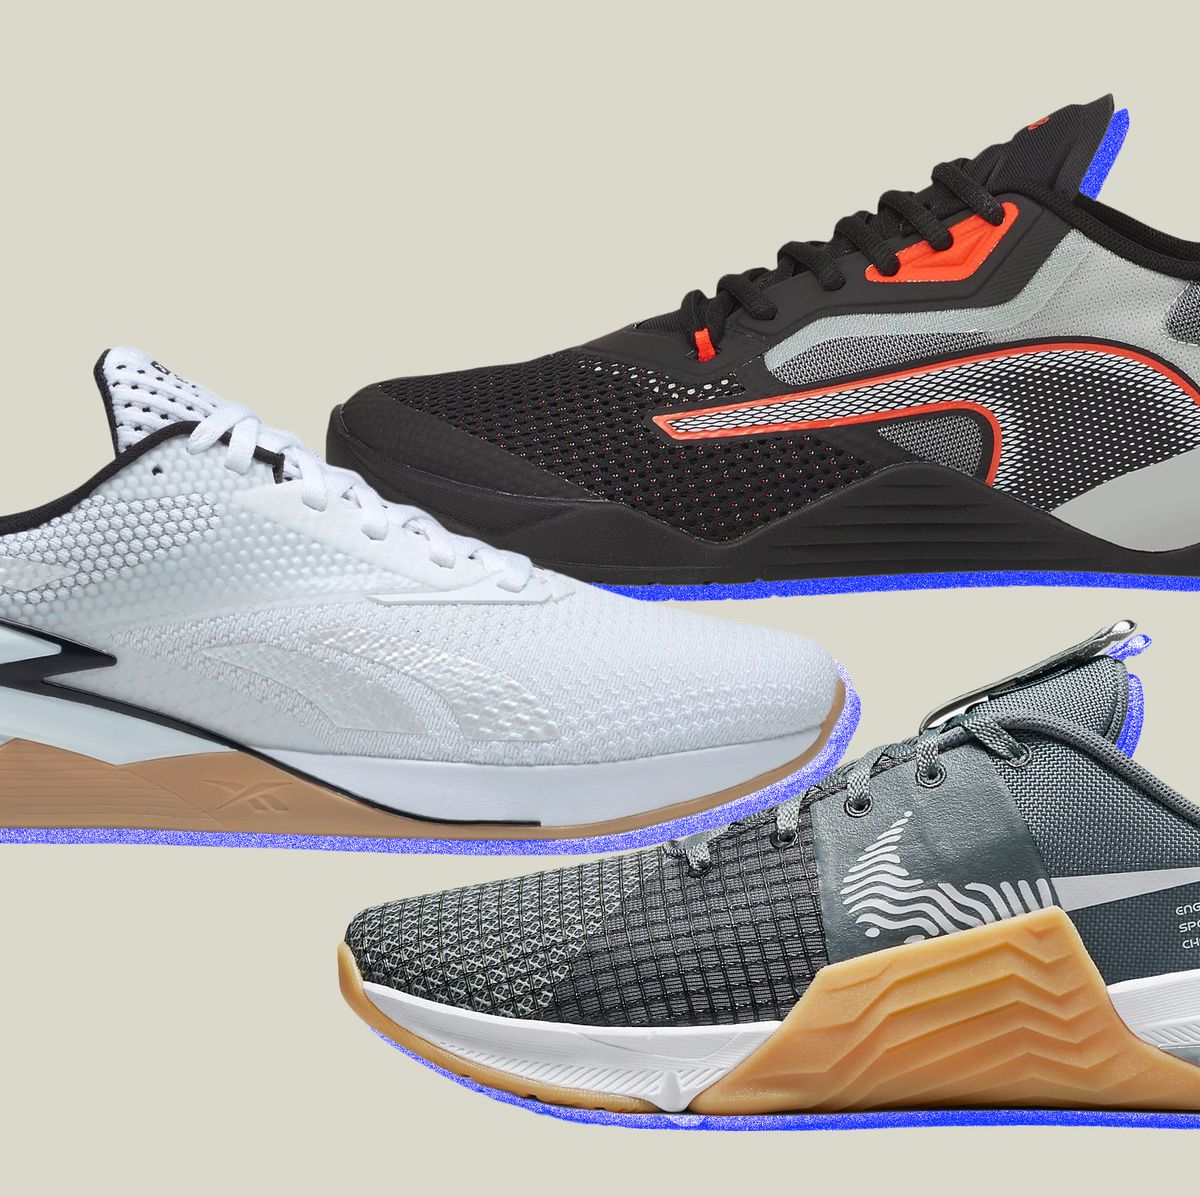 Gárgaras desfile canta The Best CrossFit Shoes for Intense Training